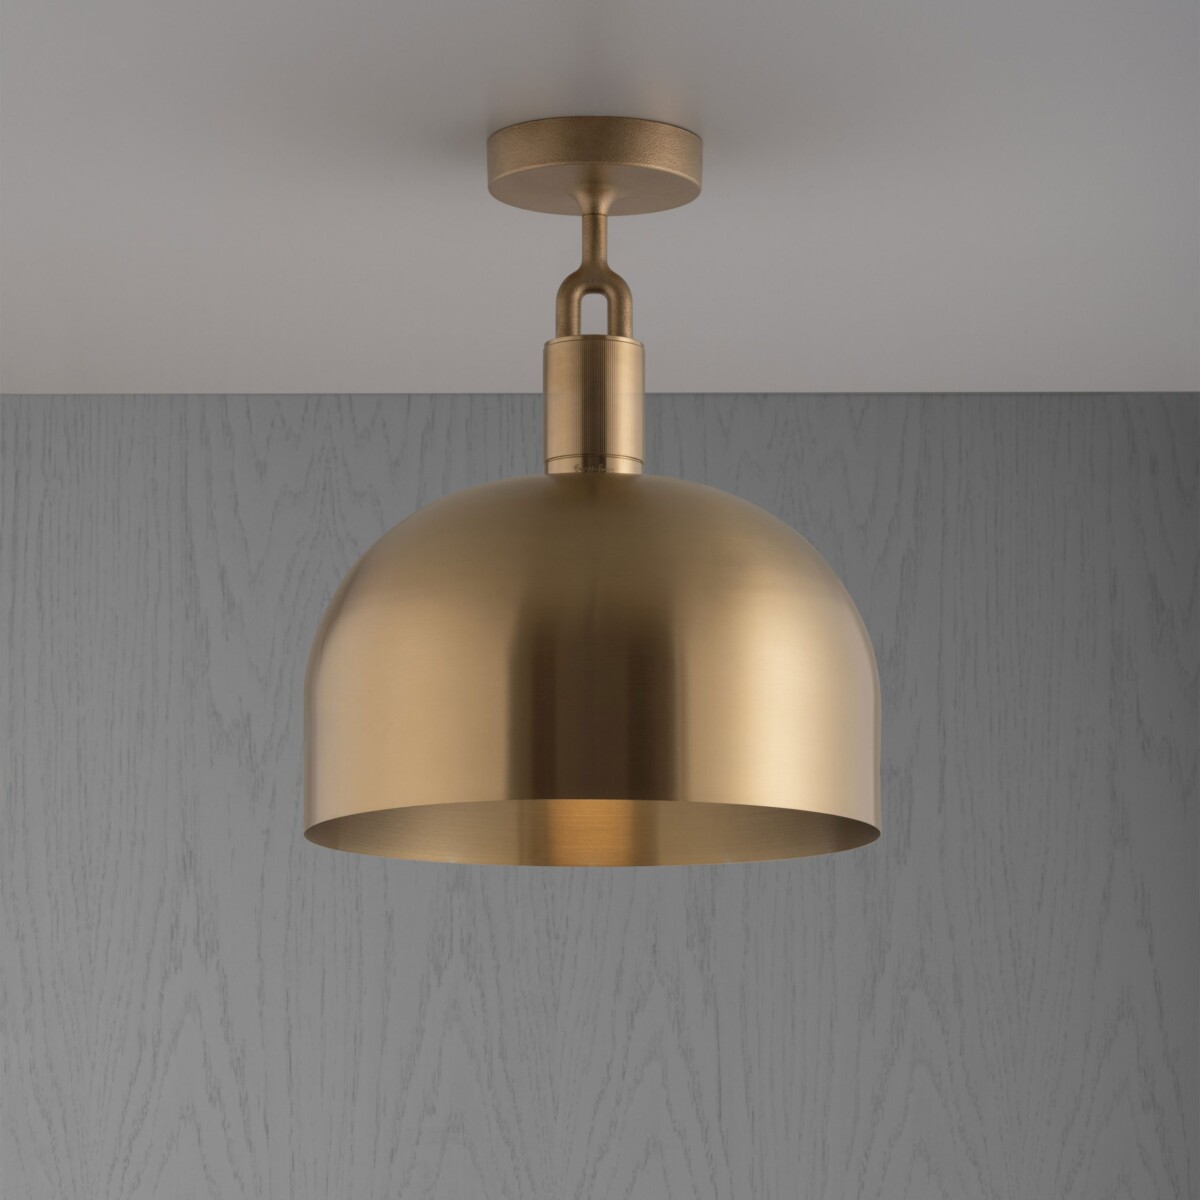 Forked_lighting_Ceiling_Brass_Large_Shade_Web-scaled